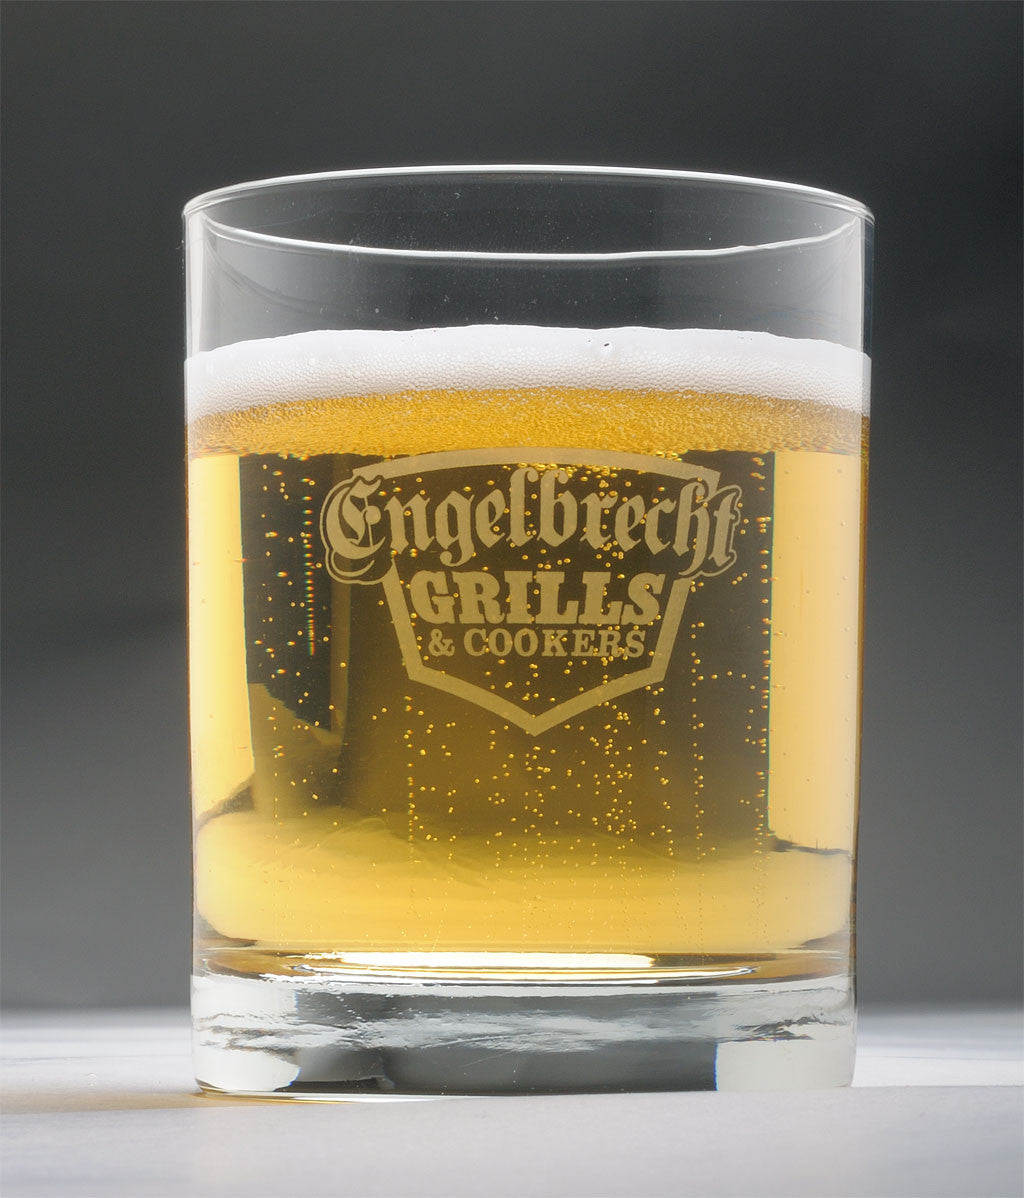 Engelbrecht Grills and Cookers branded etched drinking glass